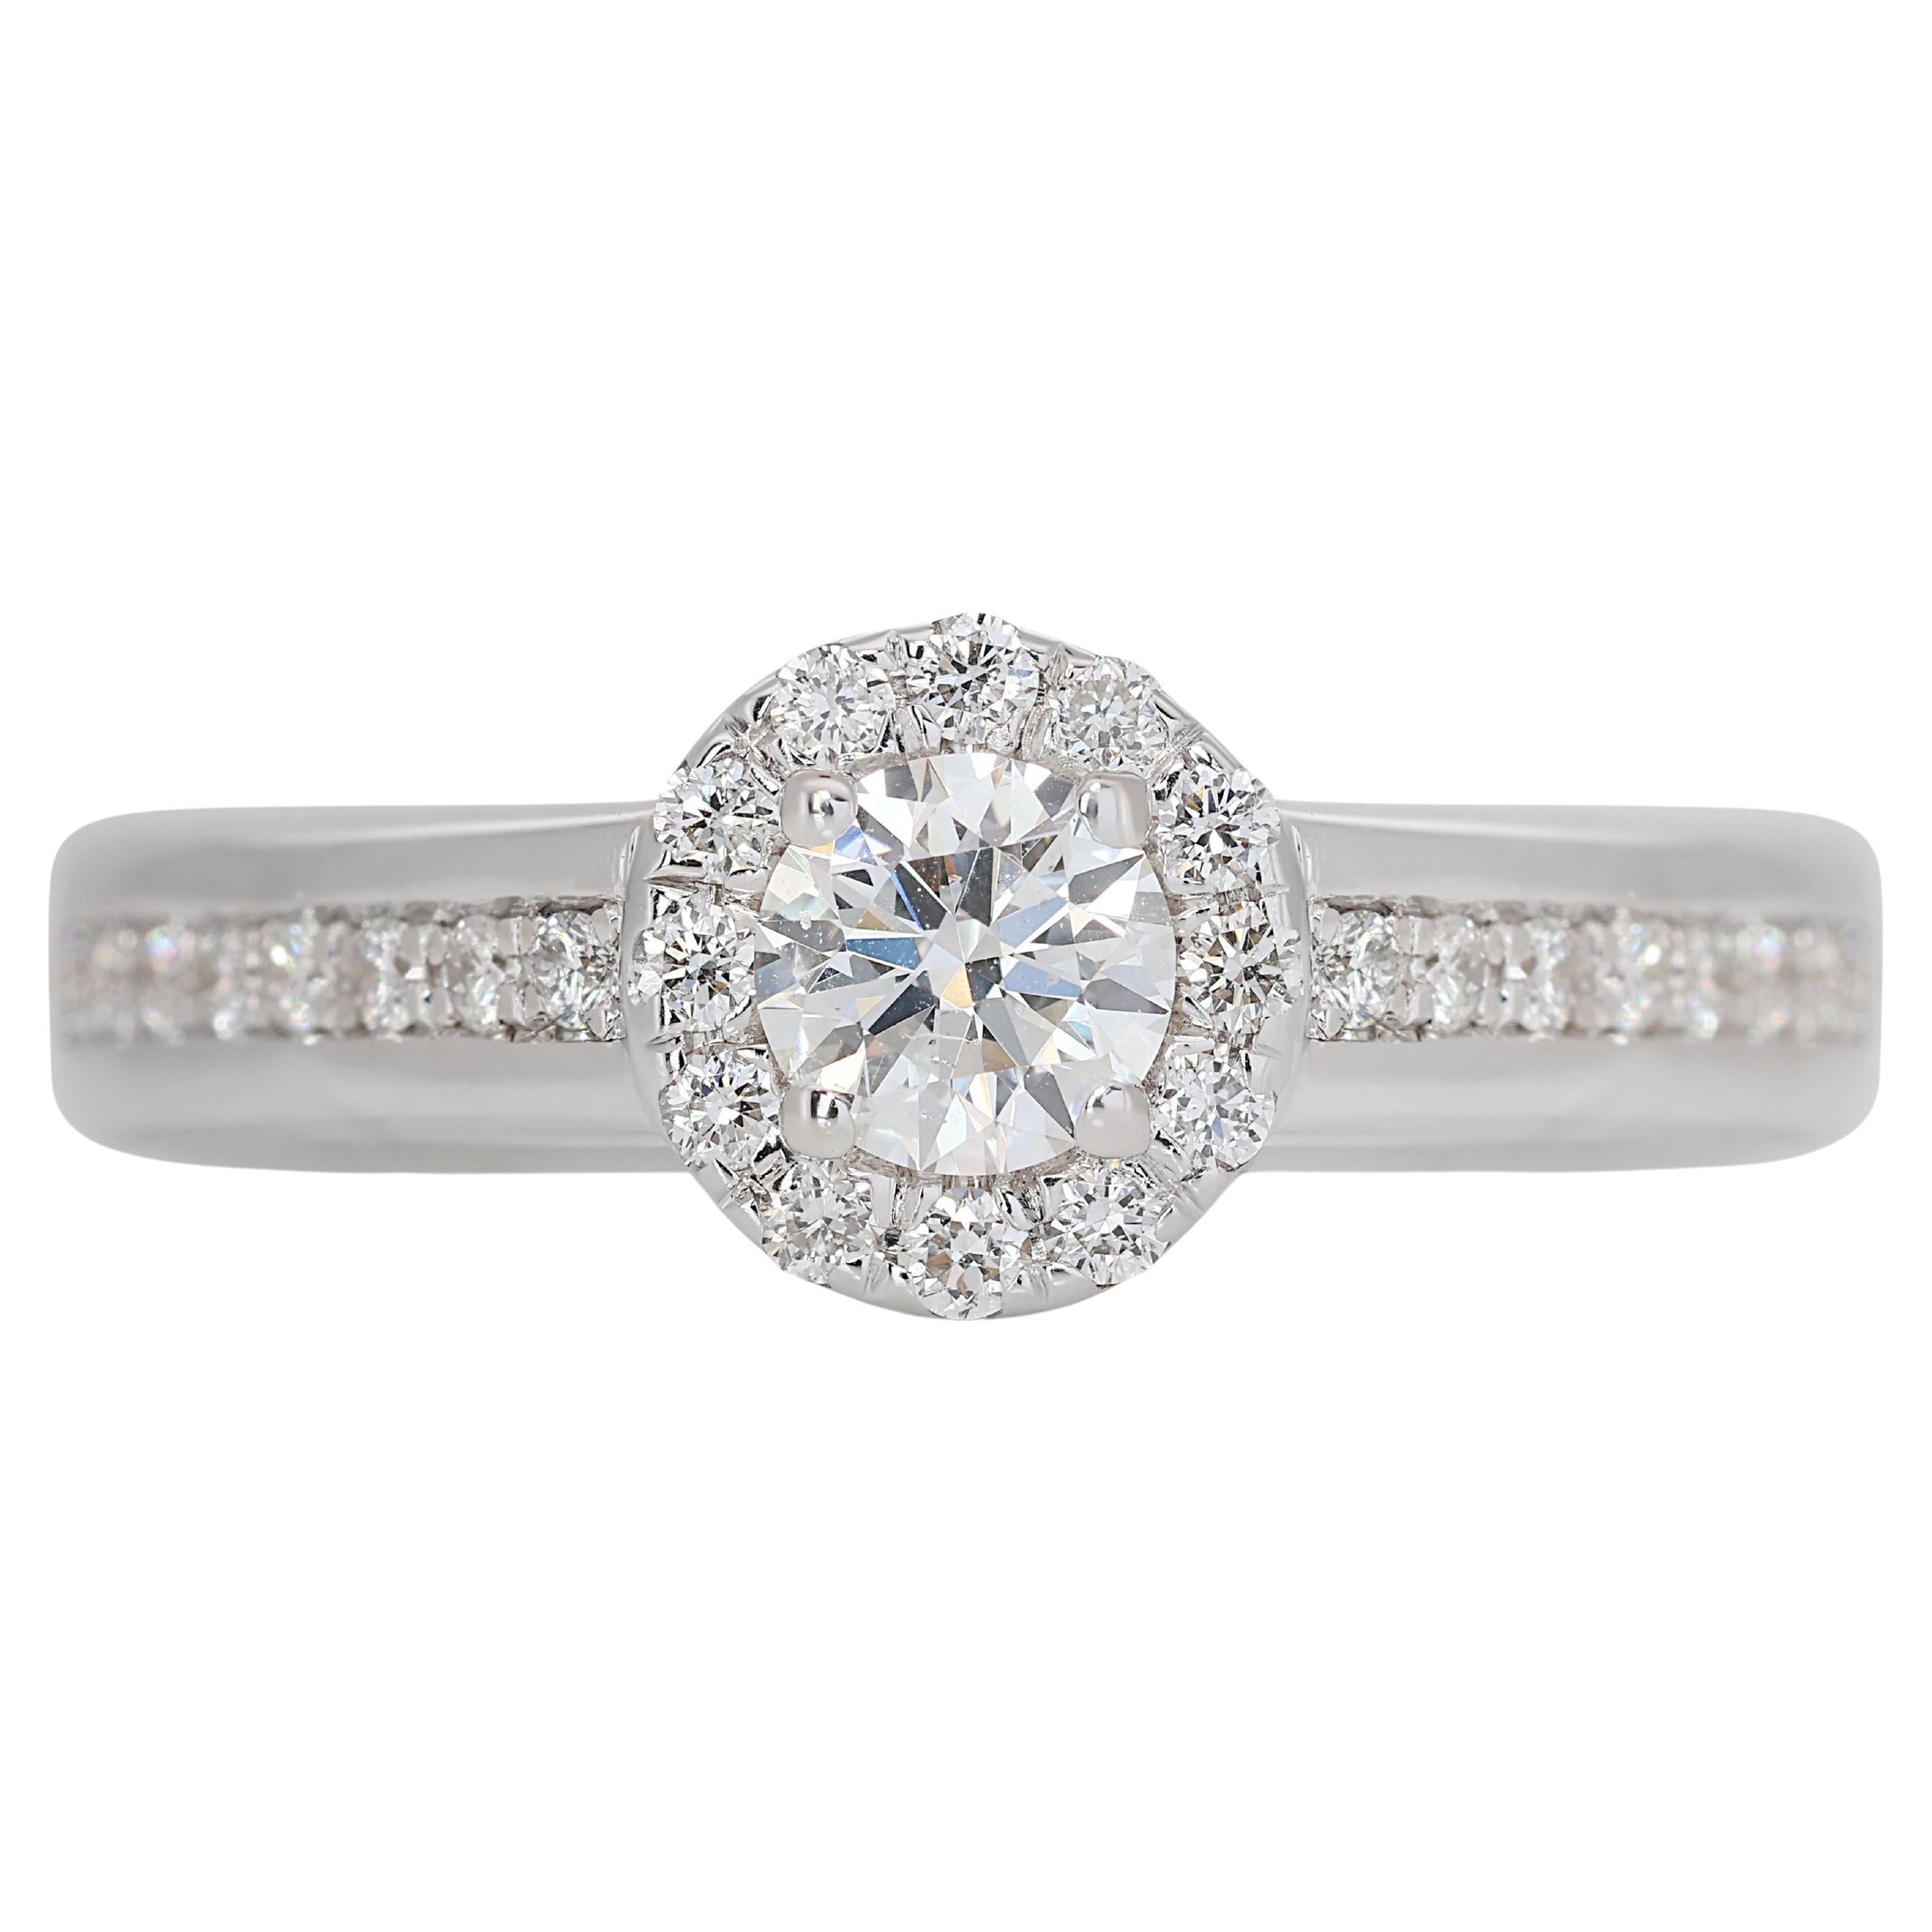 Glamorous 14k White Gold Diamond Ring with .53ct Natural Diamond For Sale